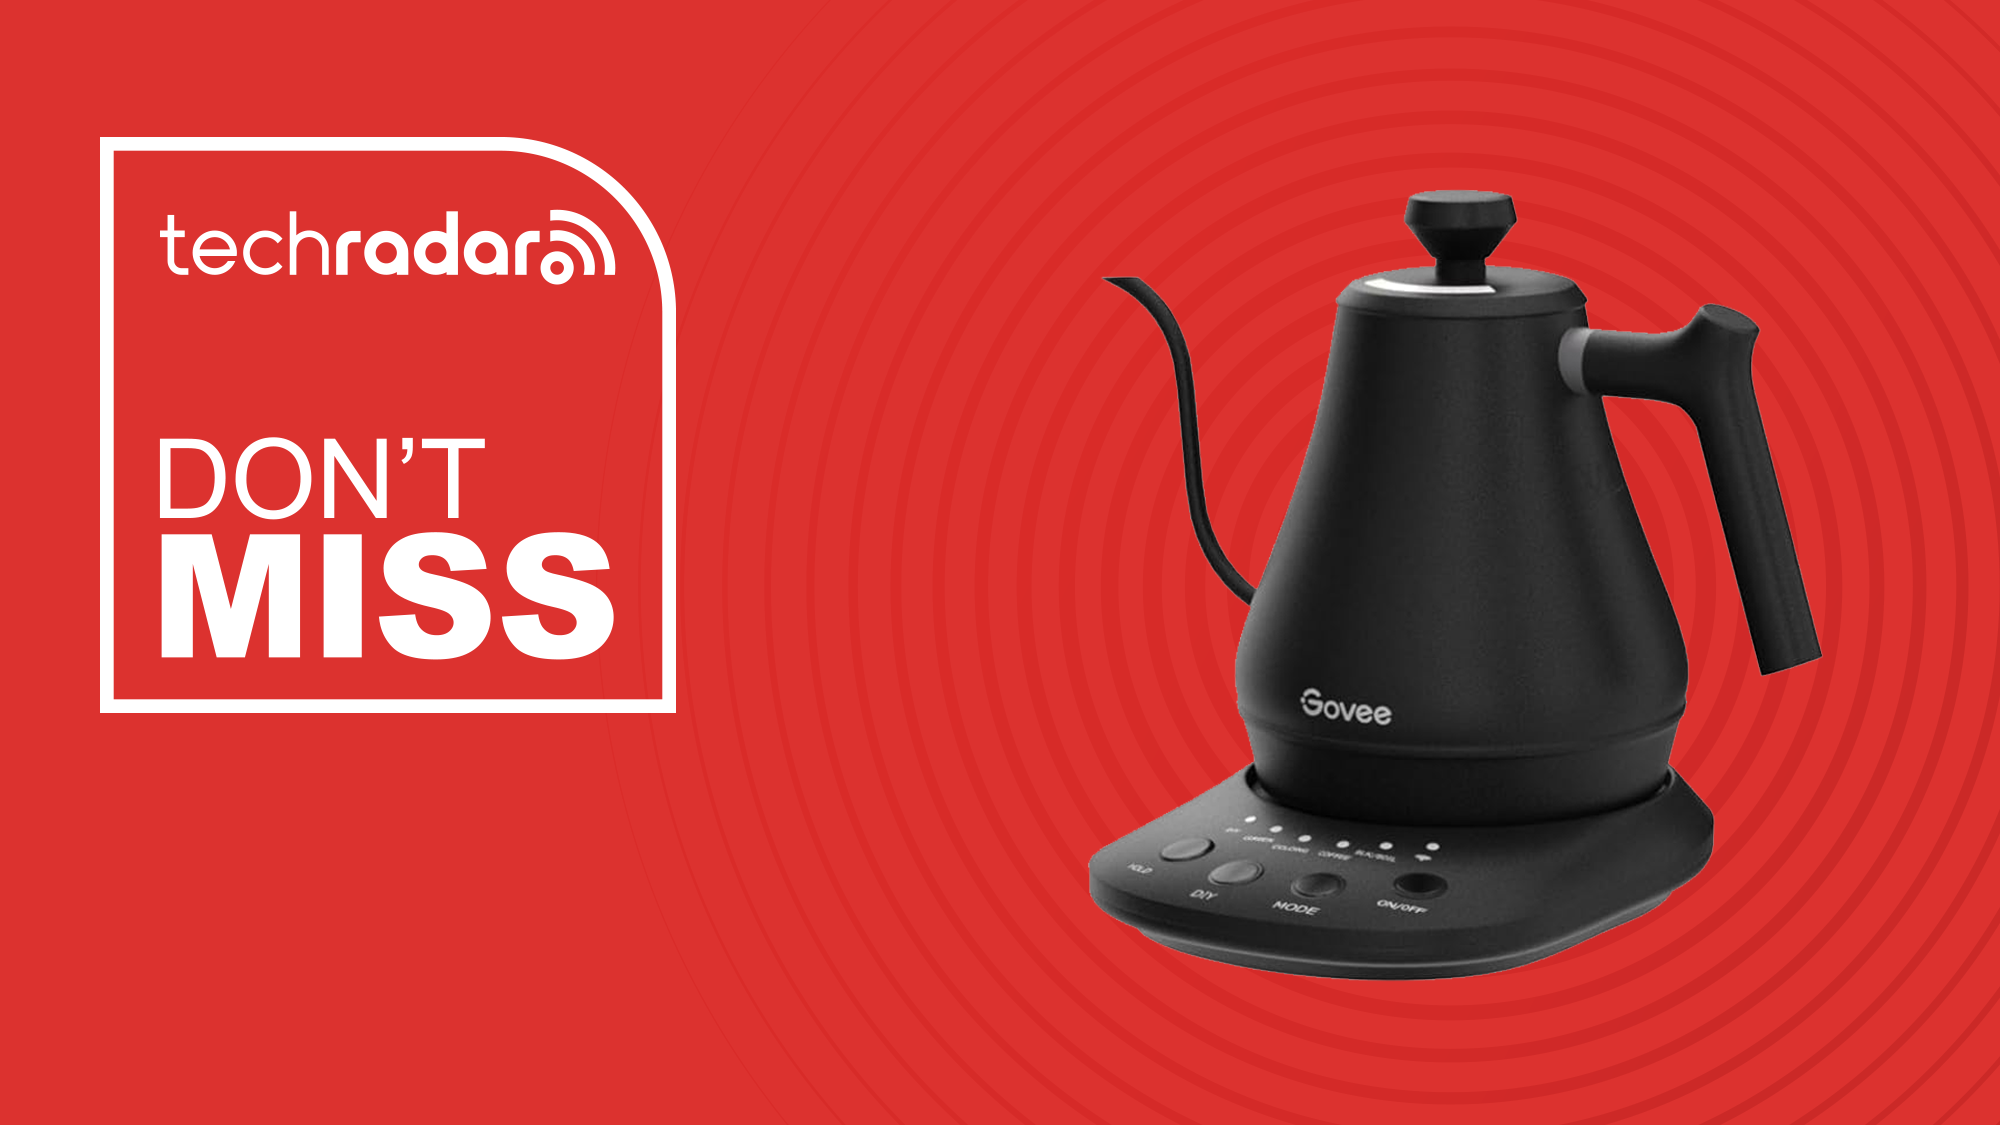 The Govee smart electric kettle is $20 off right now